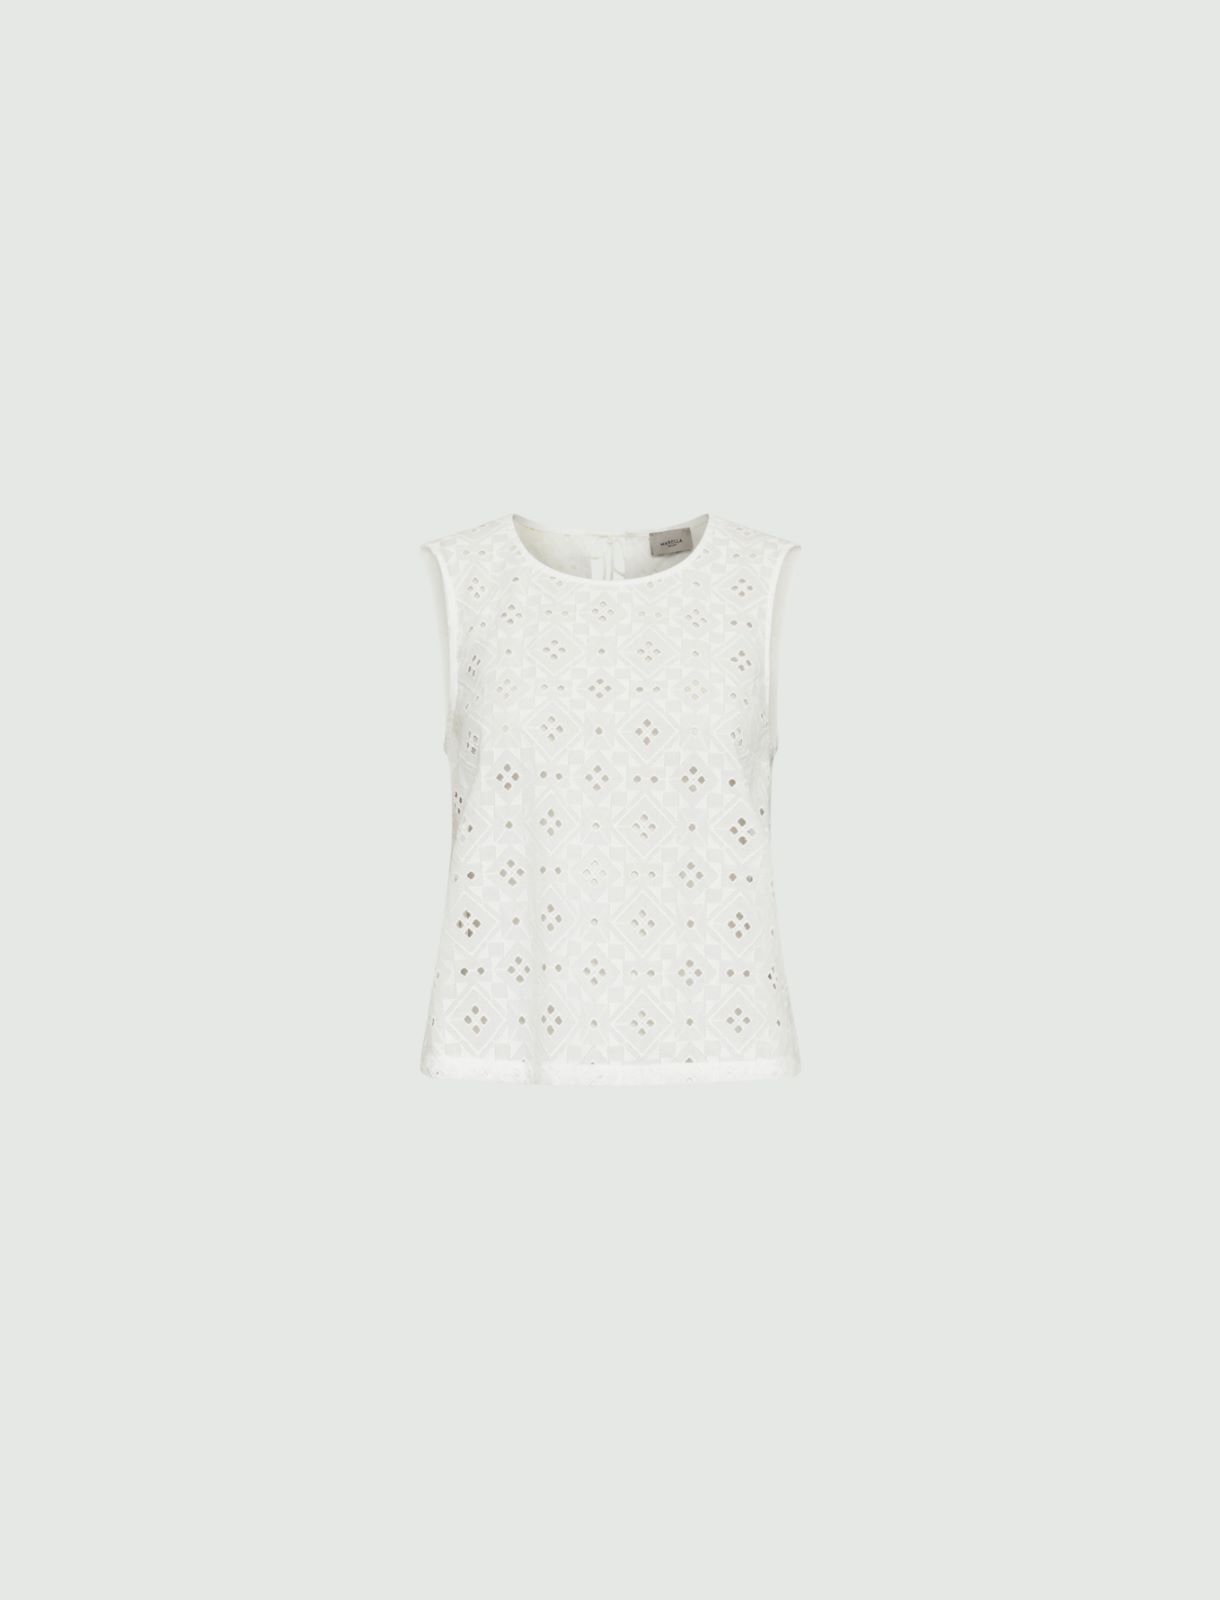 Broderie anglaise top - White - Marella - 5